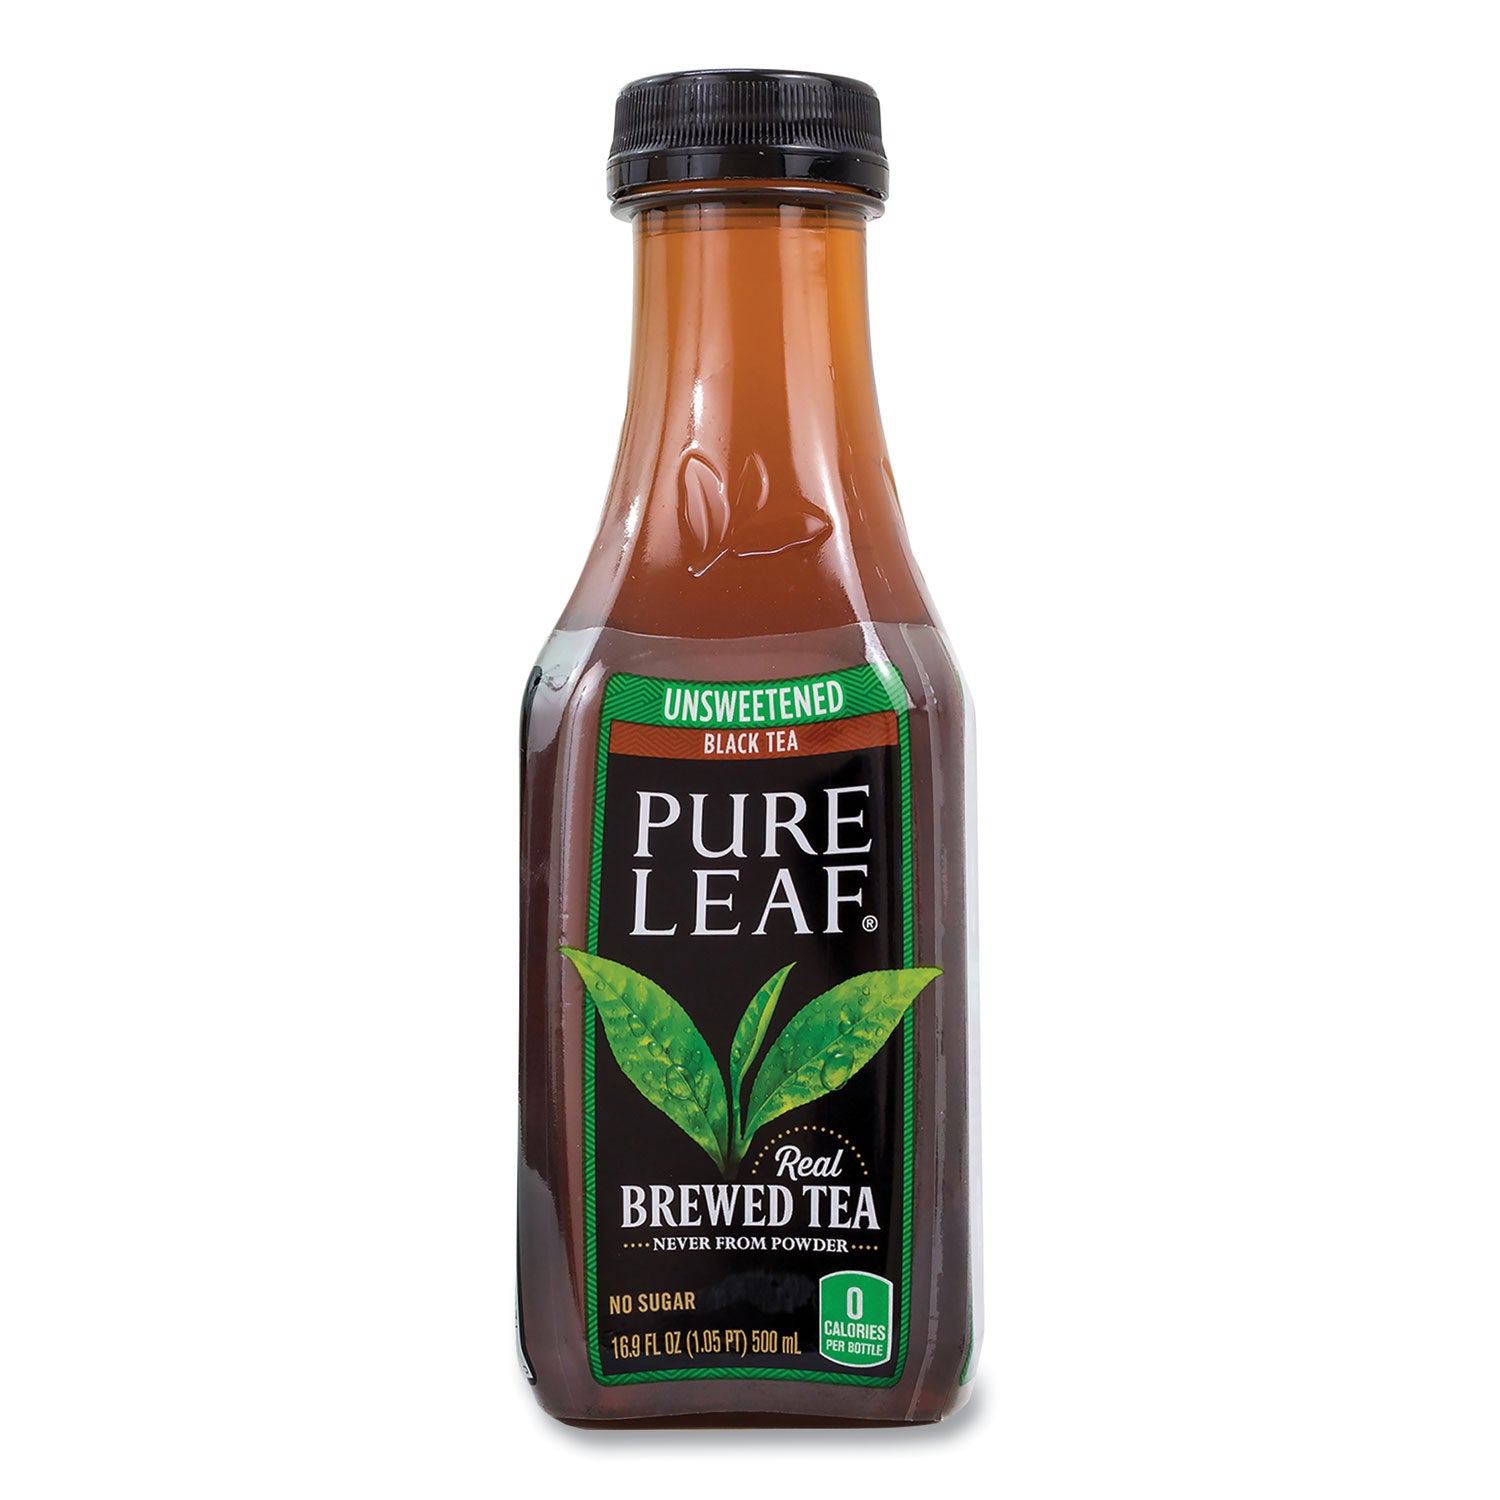 pure-leaf-unsweetened-iced-black-tea-169-oz-bottle-18-carton-ships-in-1-3-business-days_grr22002027 - 3